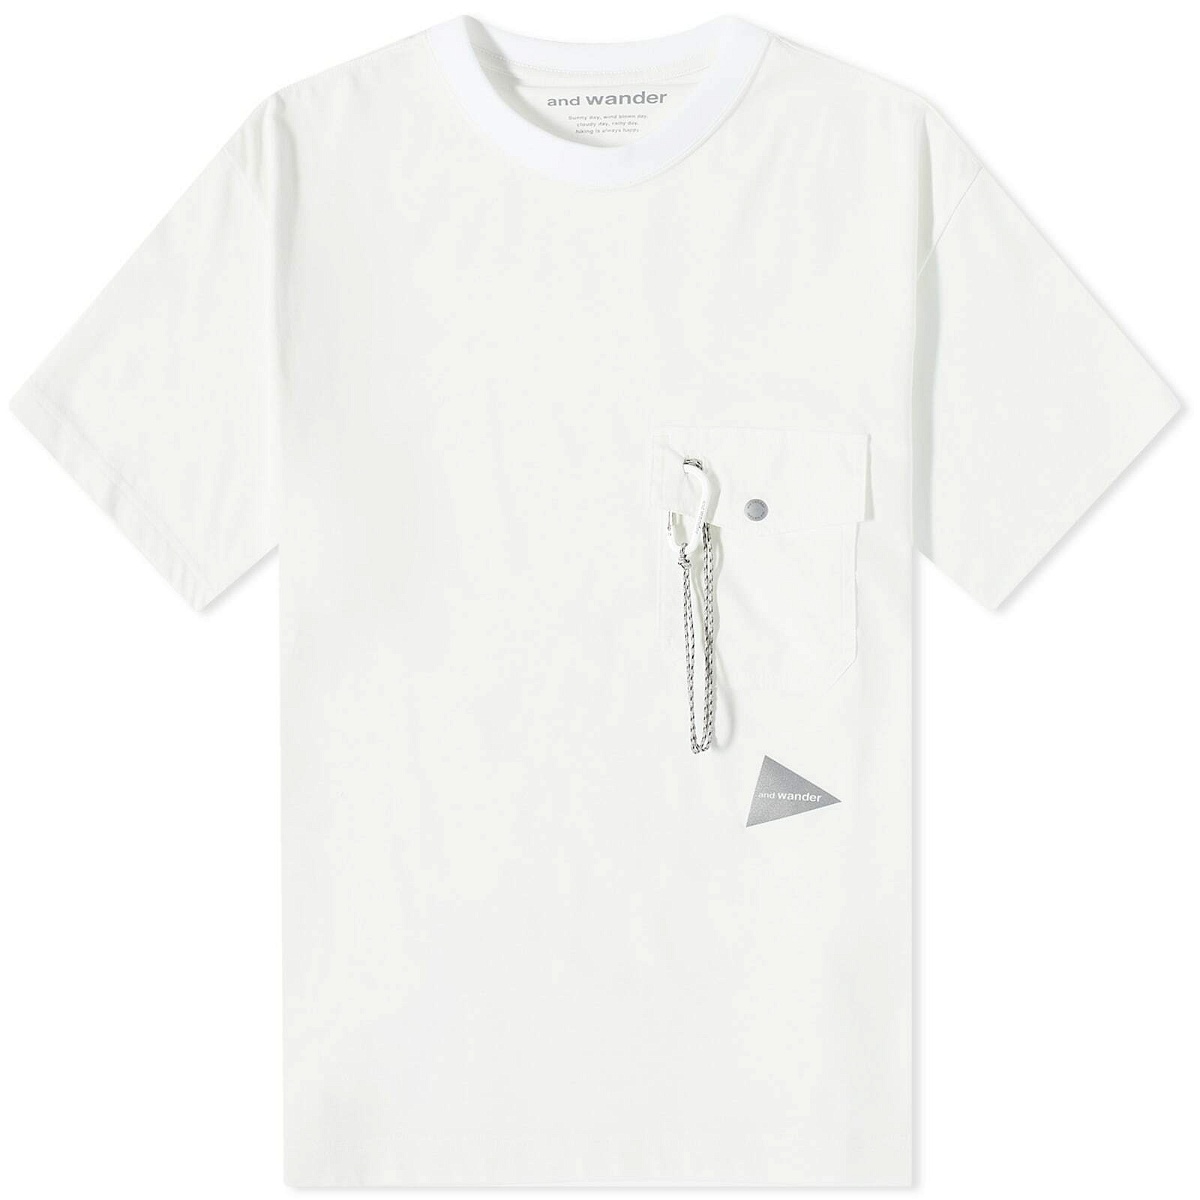 And Wander Men's Pocket T-Shirt in Off White and Wander